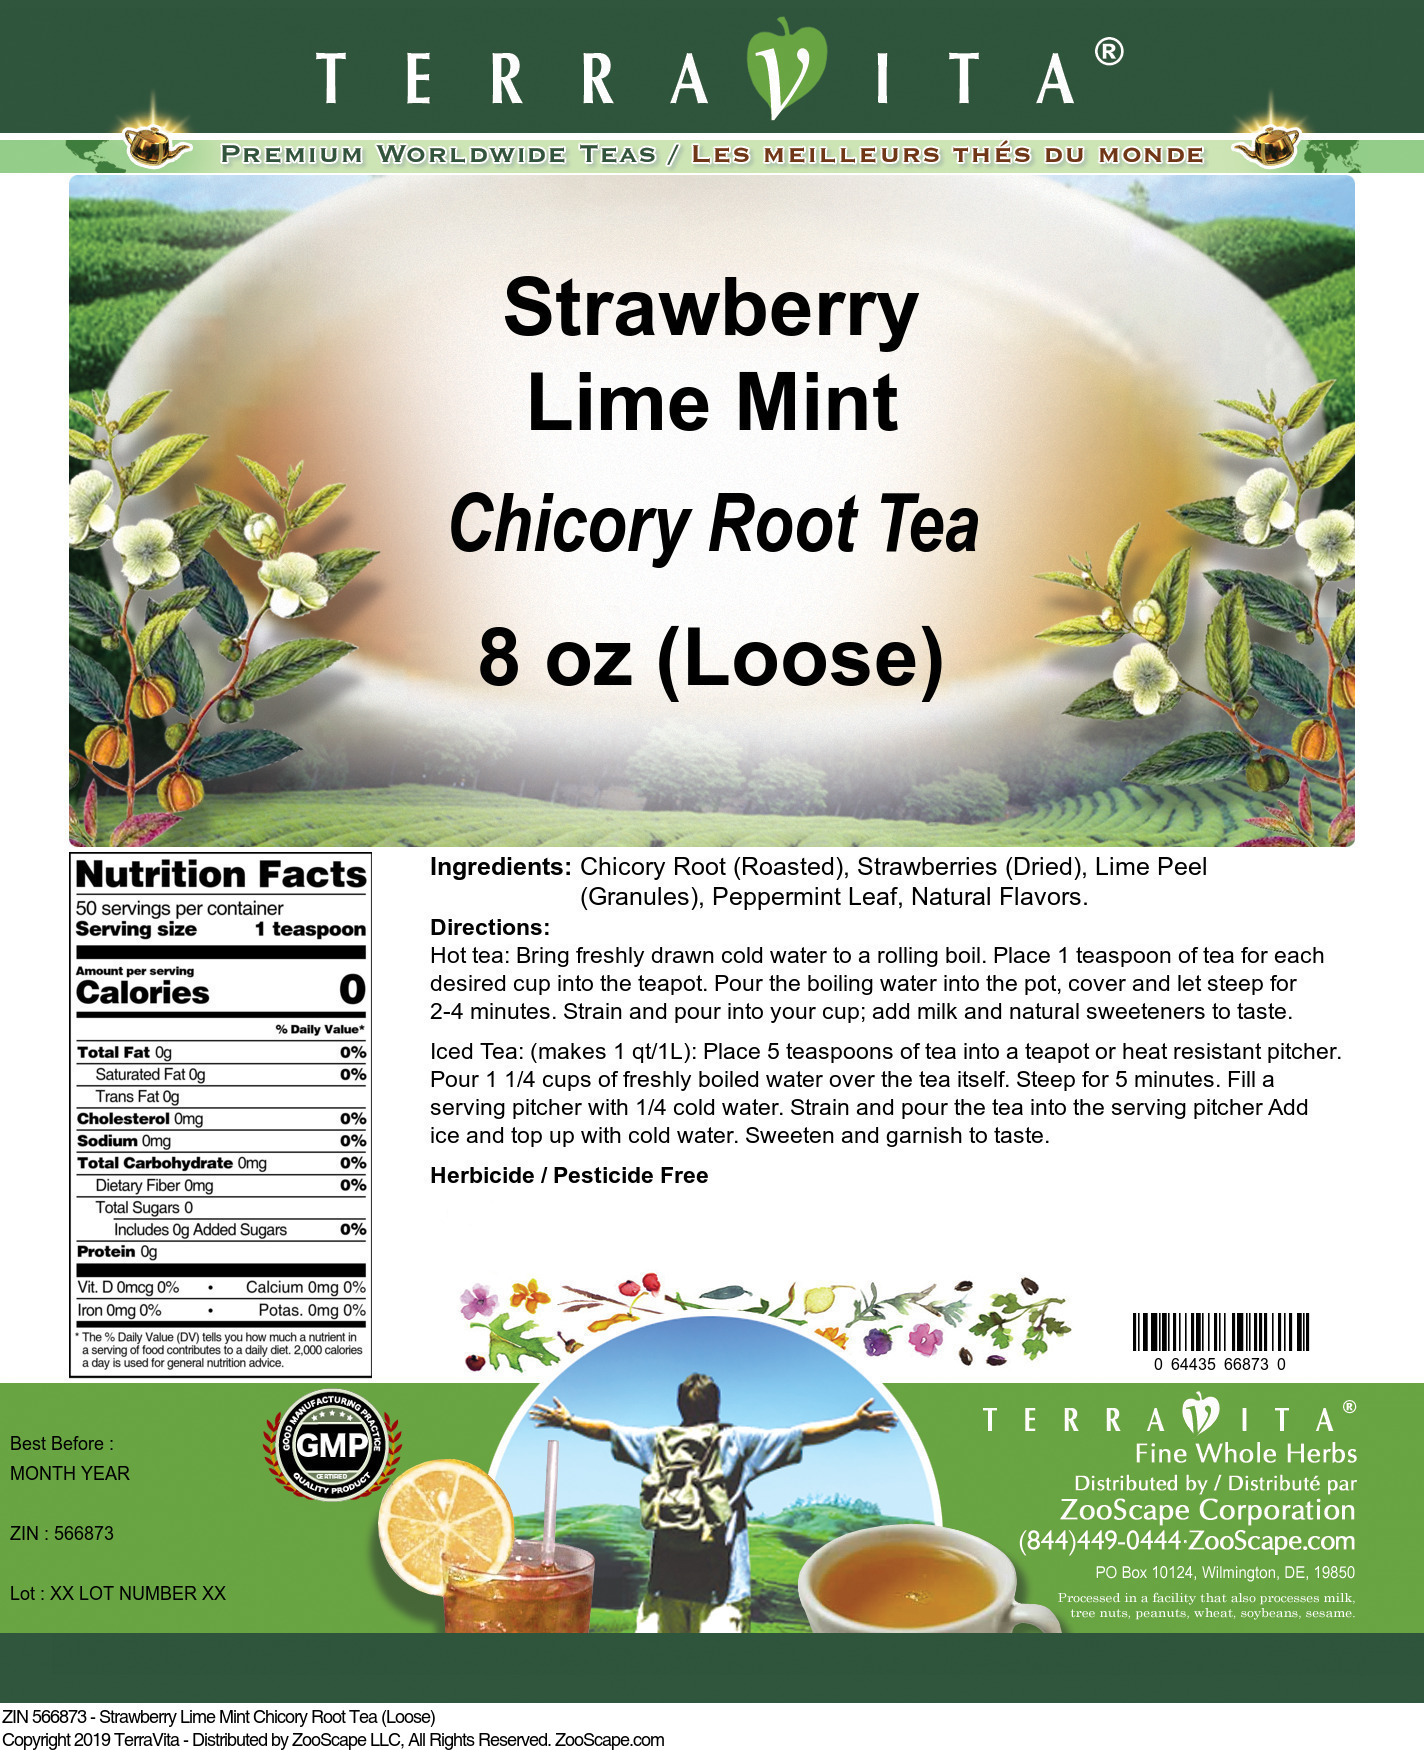 Strawberry Lime Mint Chicory Root Tea (Loose) - Label